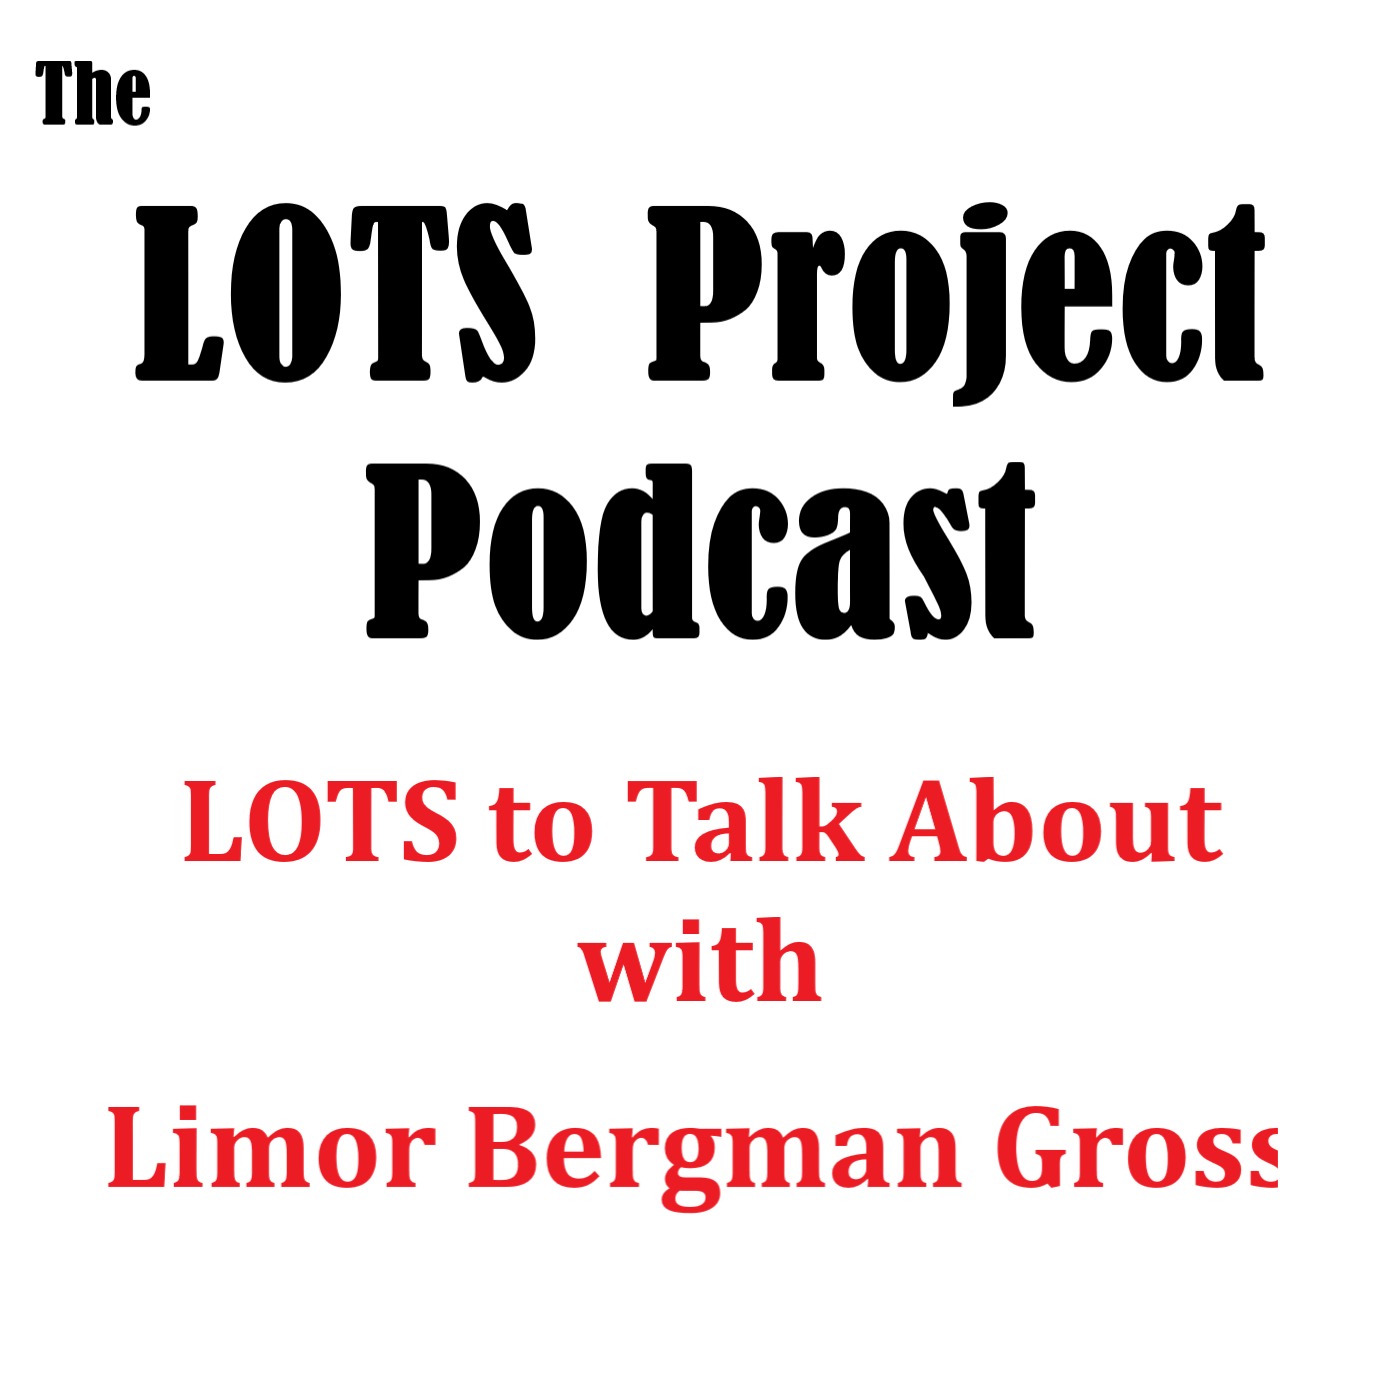 LOTS to Talk About with Limor Bergman Gross Is Your Dream Life Possible? #interview #podcast #live #dreamjob #remotework